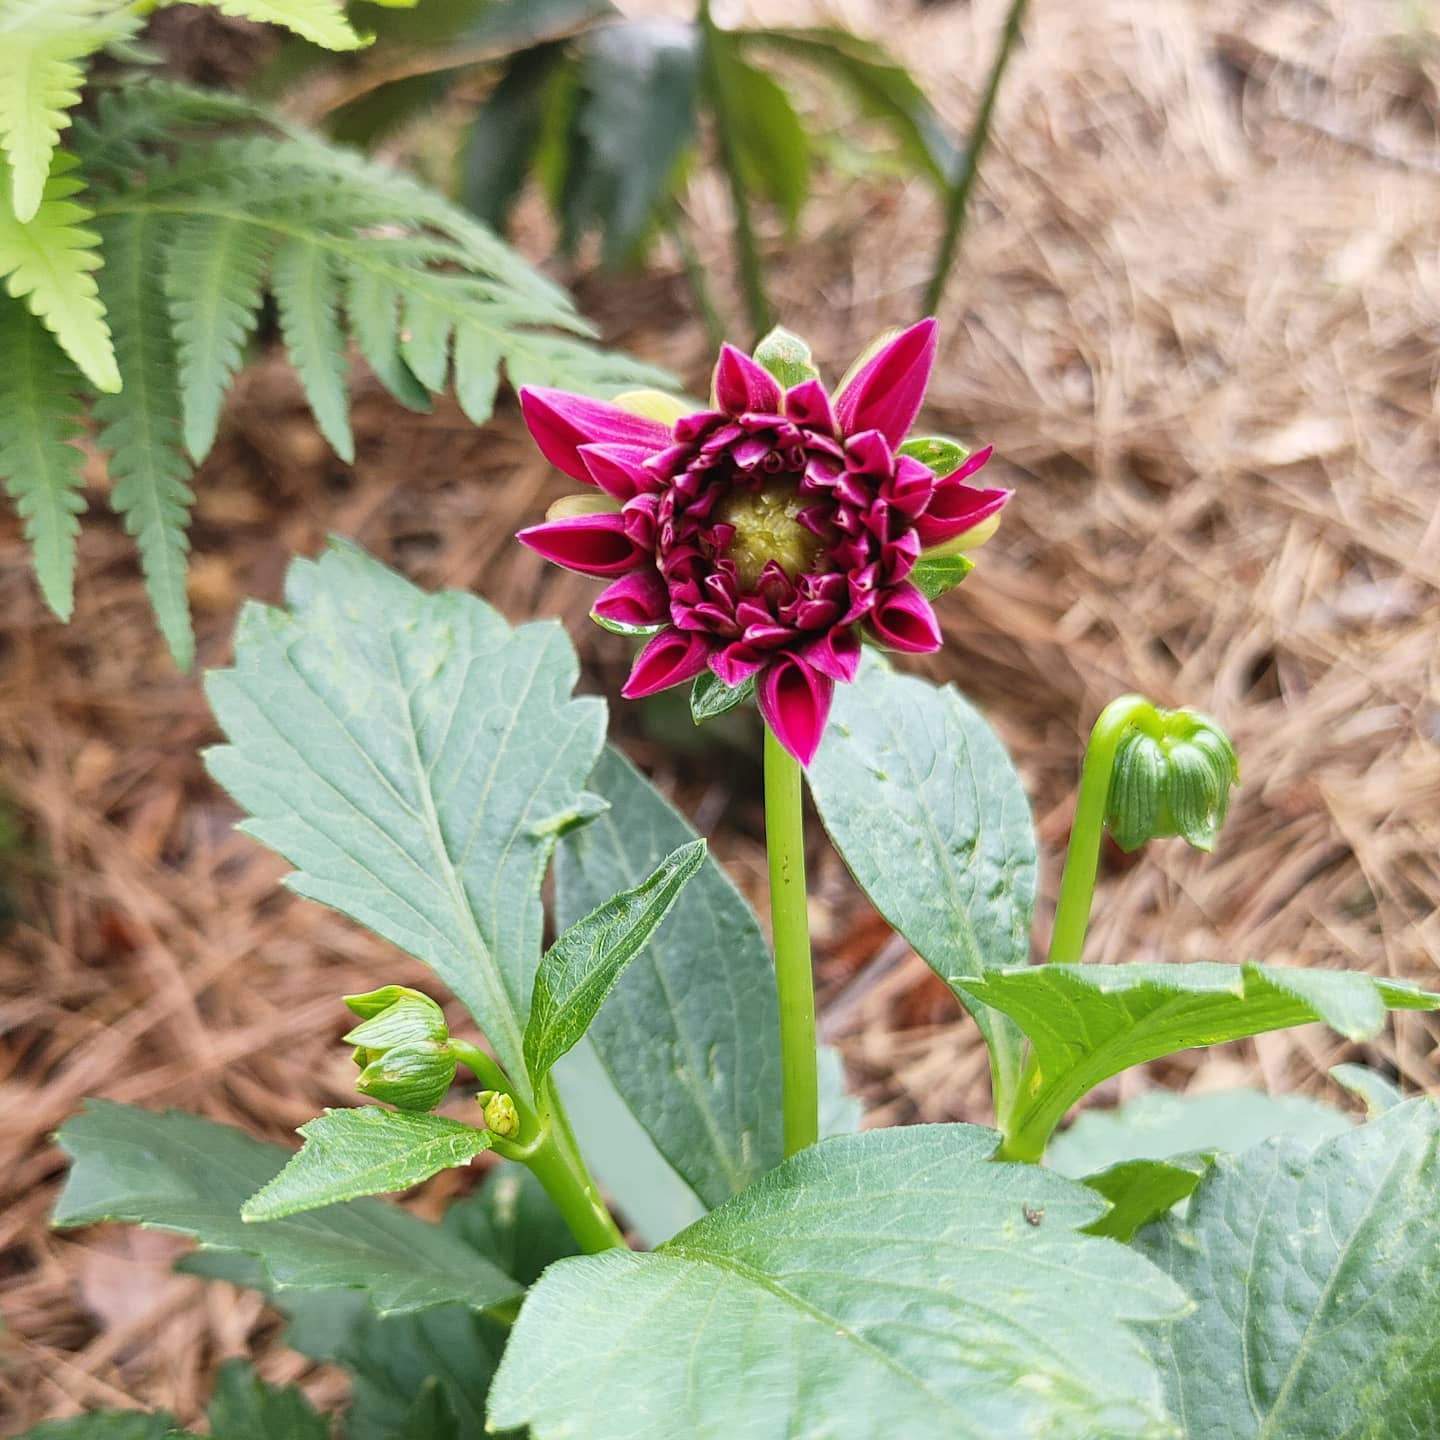 Was this a dahlia? I'm using past tense because someone ate it and dug up the roots overnight. I was pretty excited to see what it was going to be. I don't specifically remember planting it last year but the disappointment of seeing it destroyed actually rings a bell. This may be a pattern.